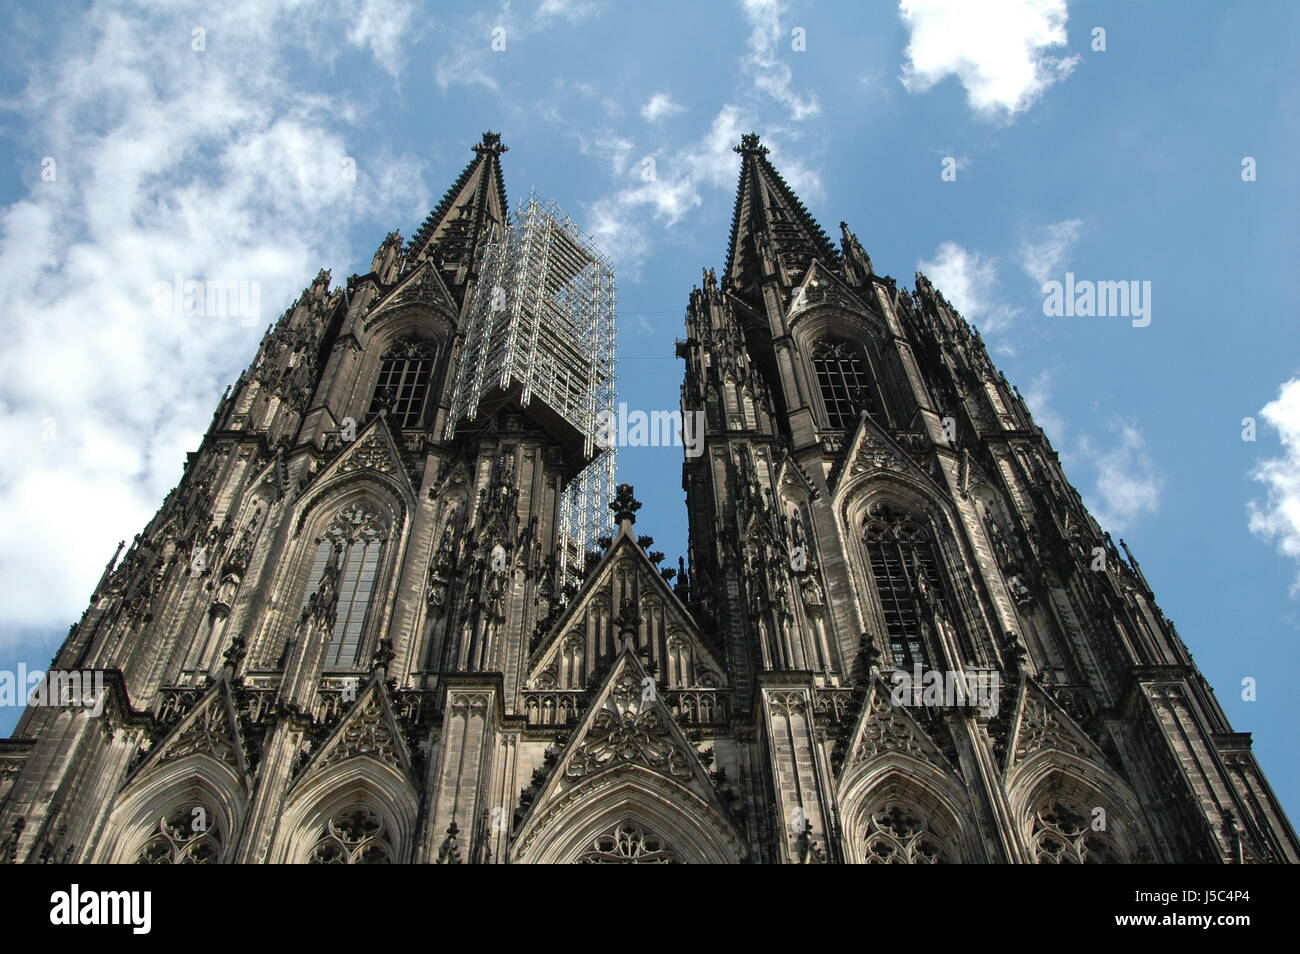 historical church cologne cathedral towers scaffold scaffolding detail view Stock Photo